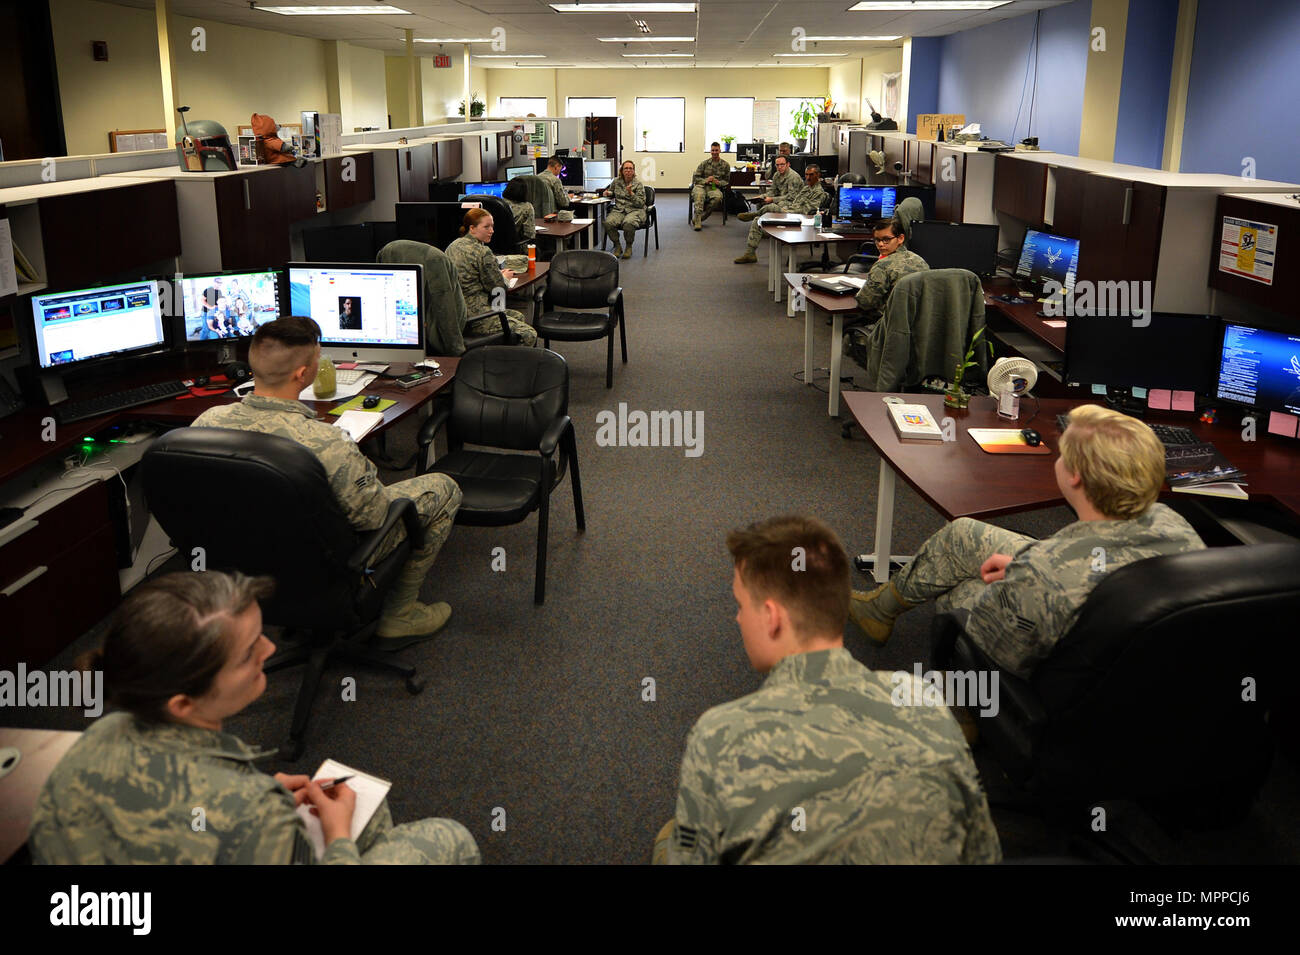 U.S. Airmen assigned to the 20th Fighter Wing (FW) Public Affairs (PA) office meet for a productivity meeting at Shaw Air Force Base, S.C., March 21, 2017. Photojournalists assigned to the 20th FW PA office are tasked with documenting base operations, as well as taking and distributing official studio and passport photos for Airmen who are applying for award packages and preparing for deployments and permanent change of stations. (U.S. Air Force photo by Airman 1st Class Christopher Maldonado) Stock Photo